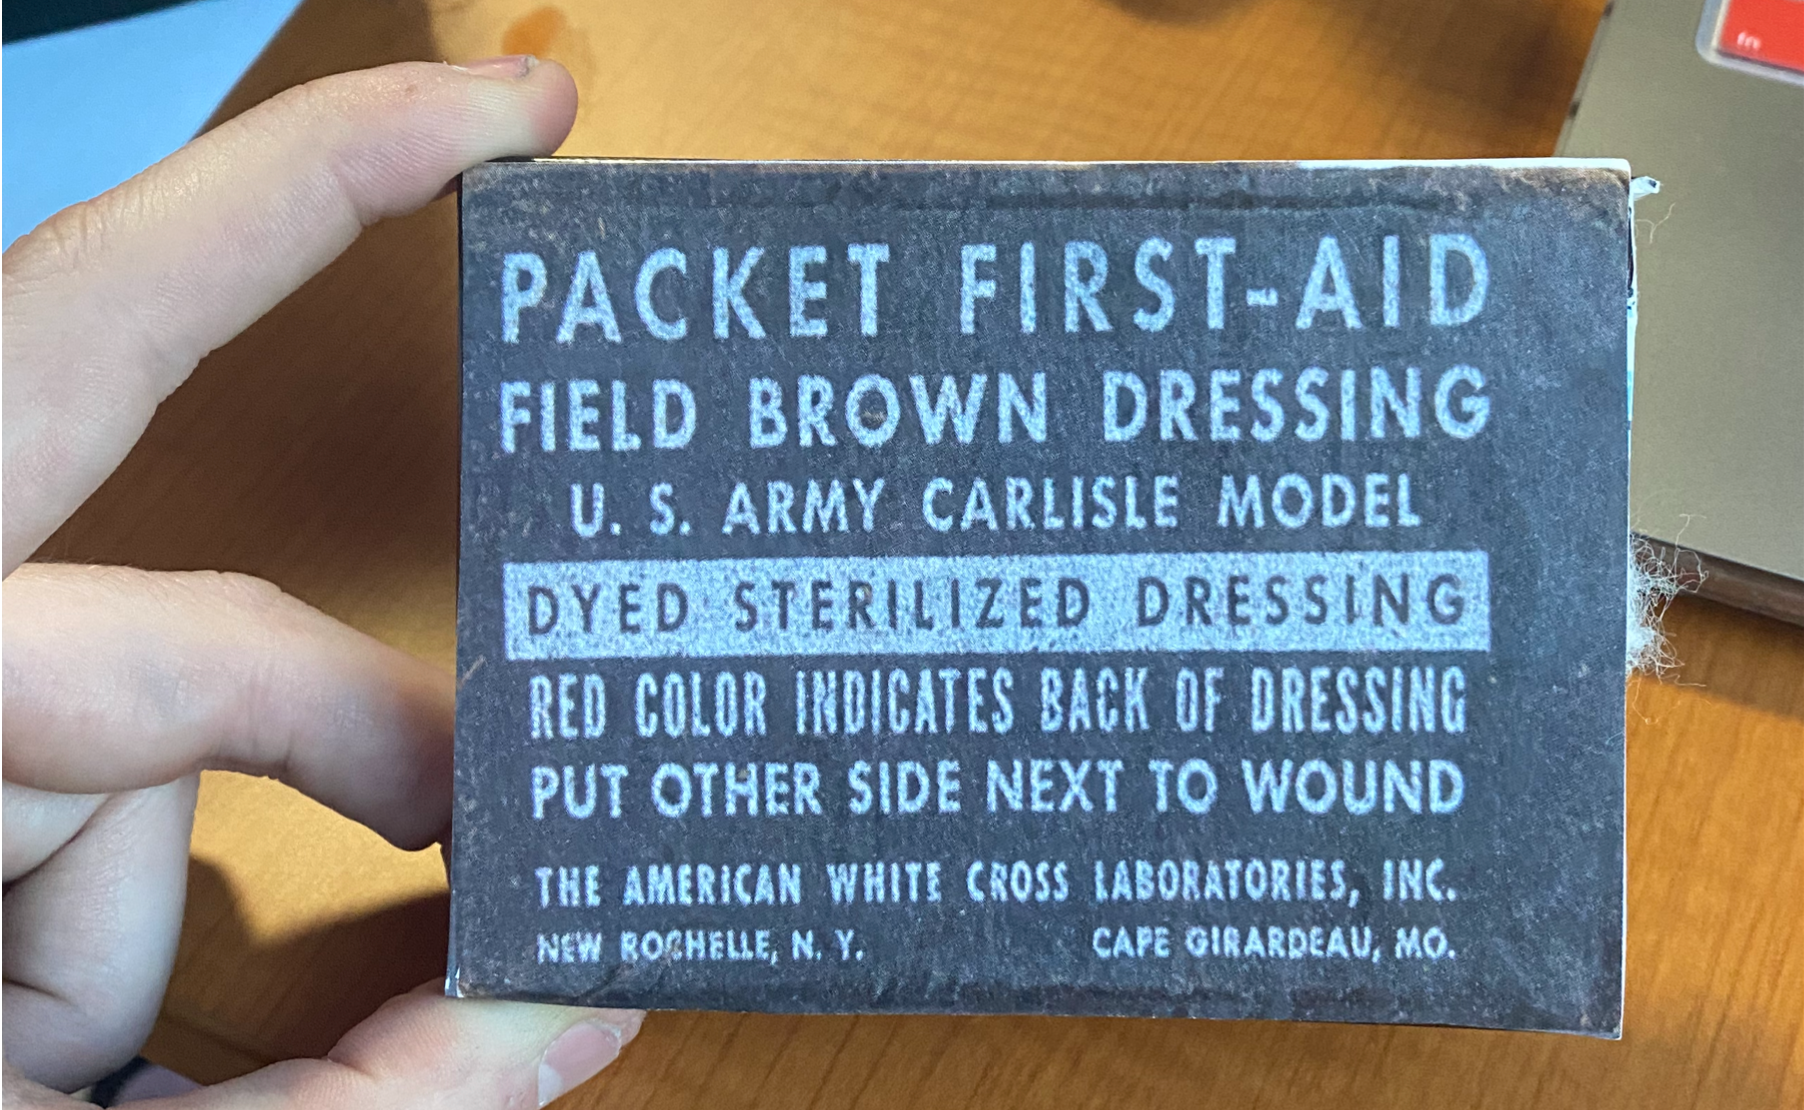 Recreation of a dyer sterilize dressing bar. The label states that to use "put other side next to wound". The label includes the name of the manufacturer and the place where it was produced